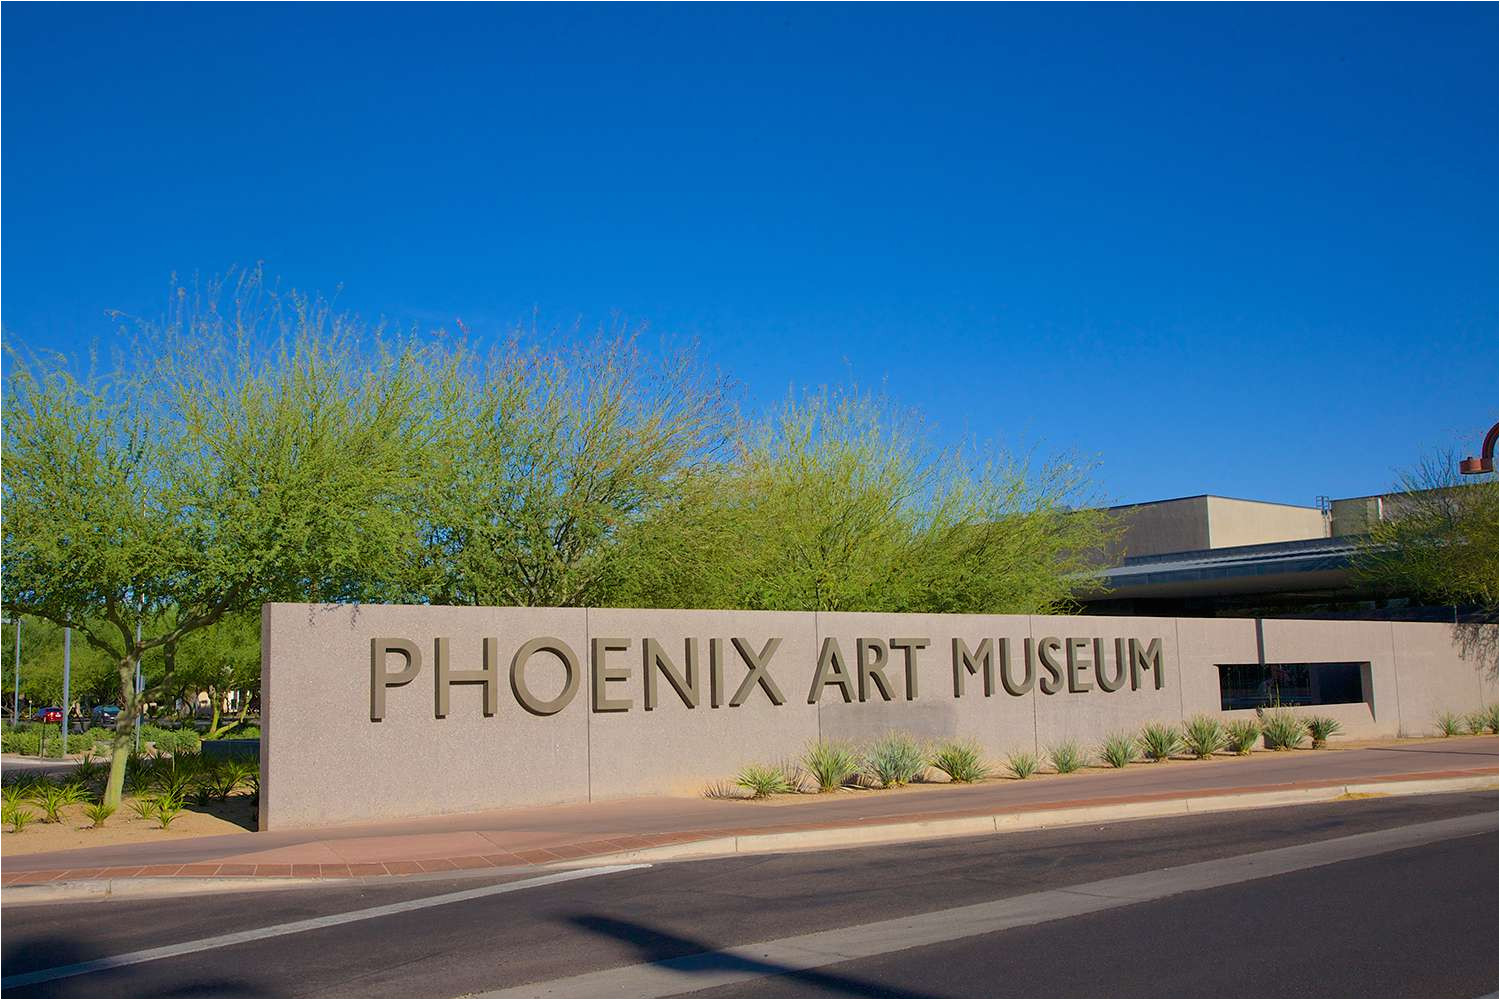 Light the Night Phoenix Art Museum Phoenix Festivals and events In August 2018